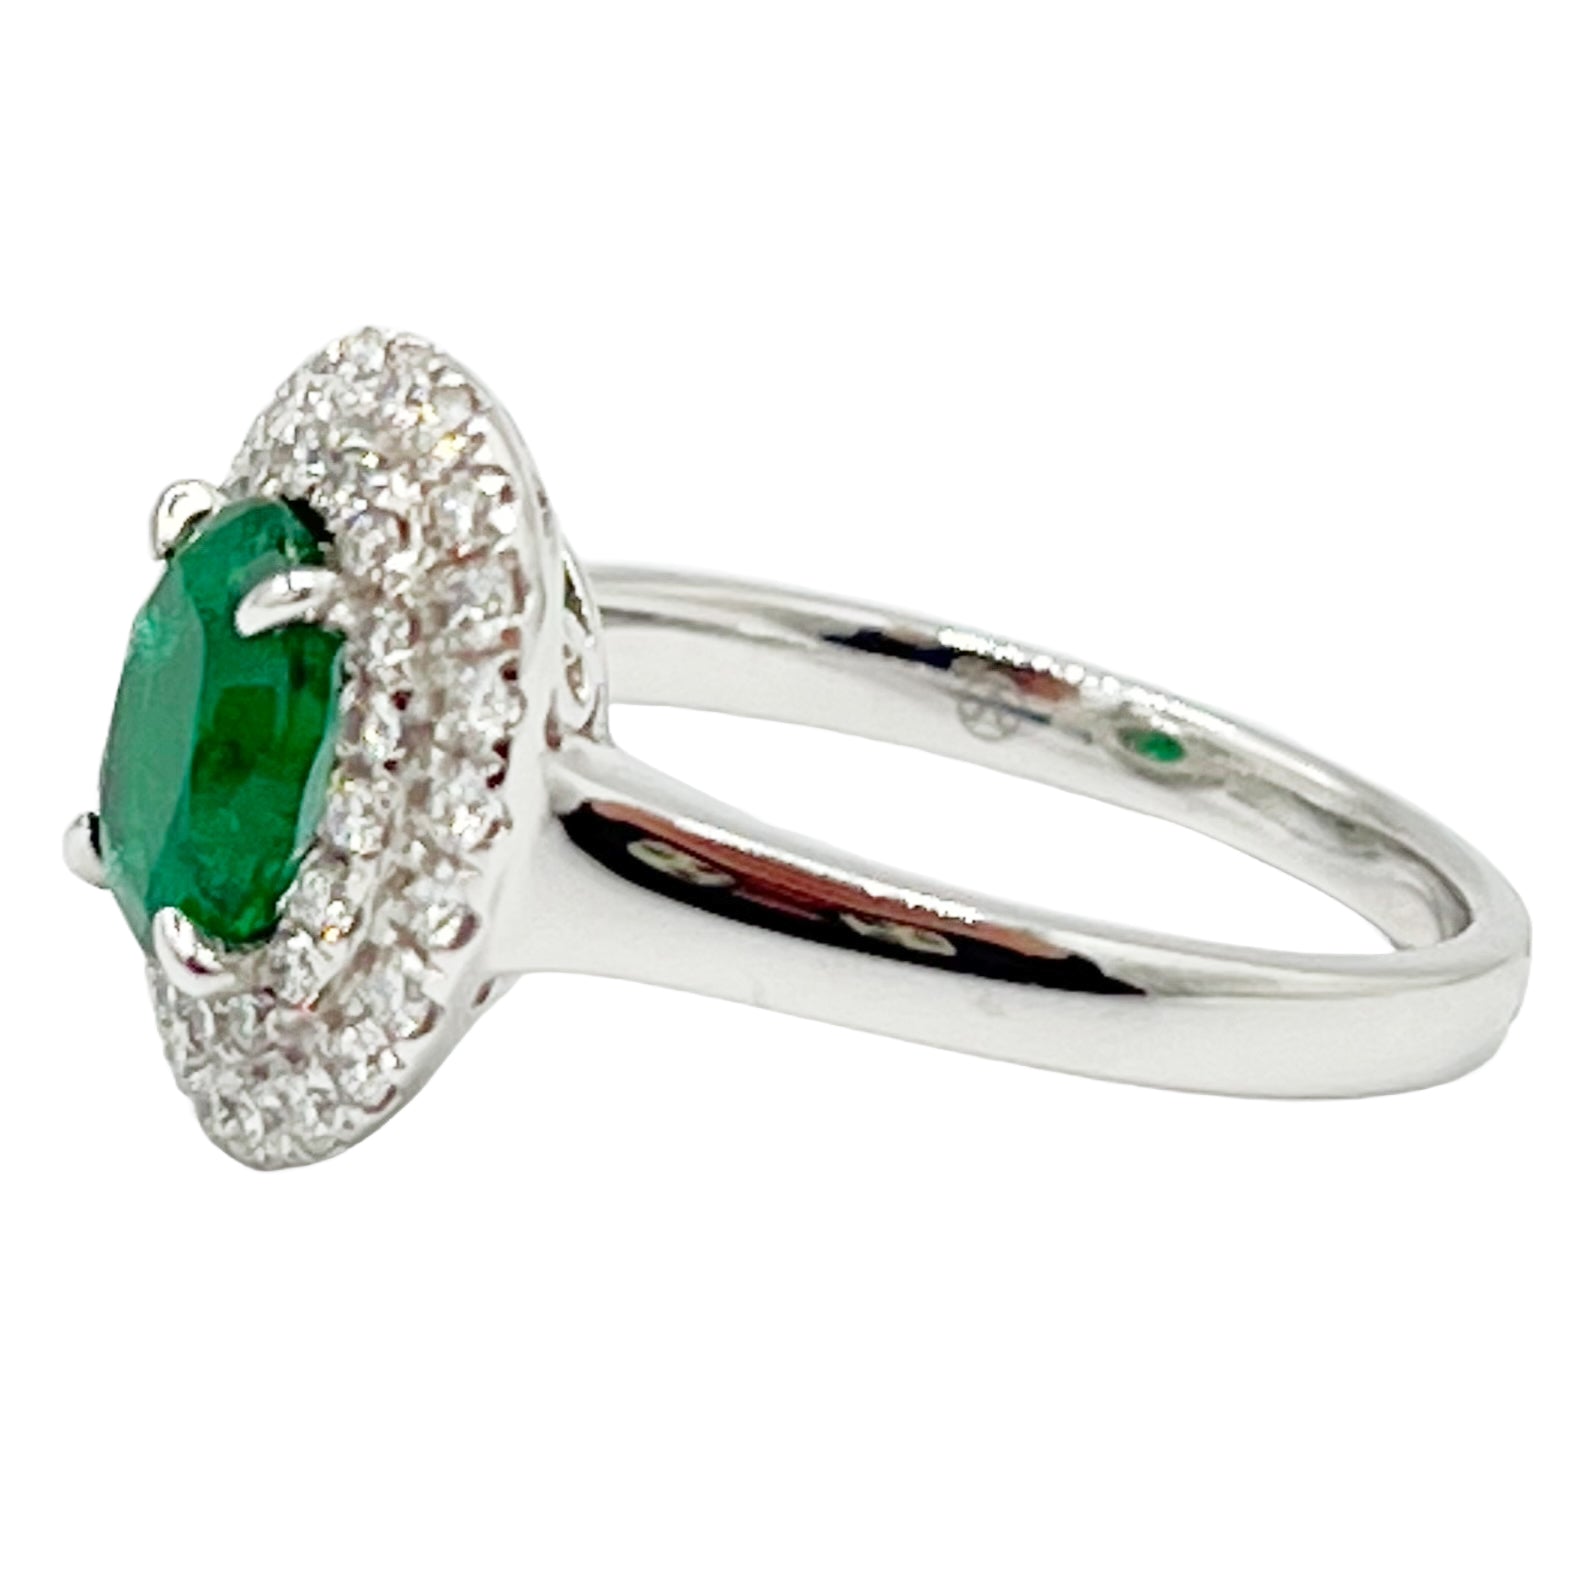 Ring 18KW/4.7G 1EMER-0.98CT 40RD-0.46CT